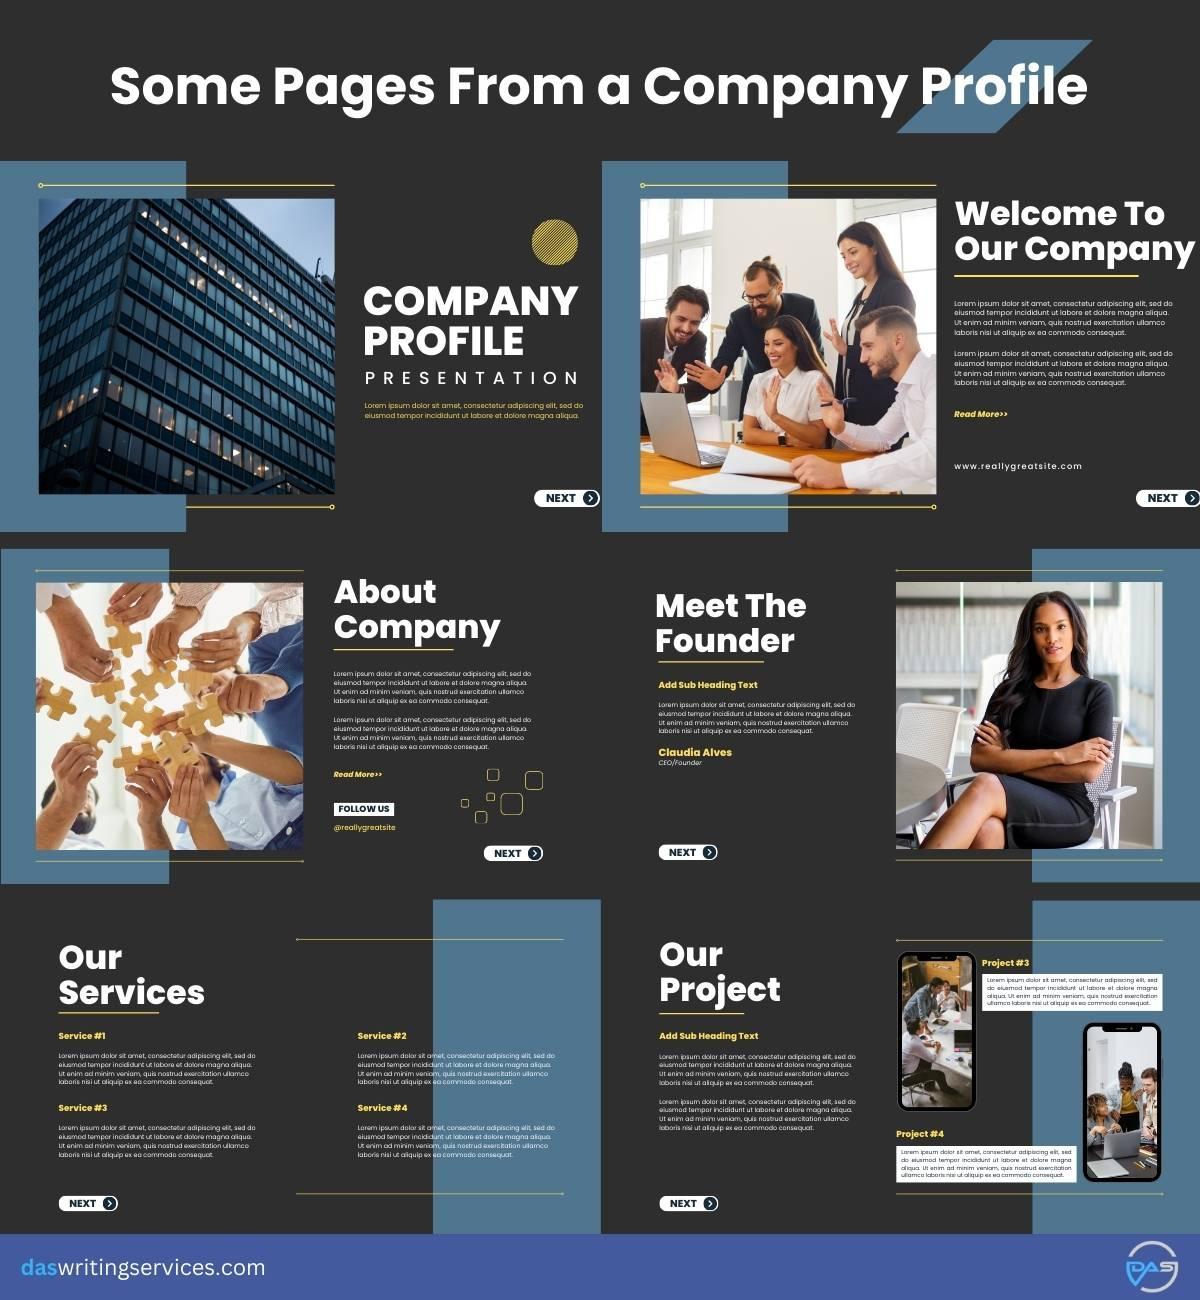 what is a company profile?